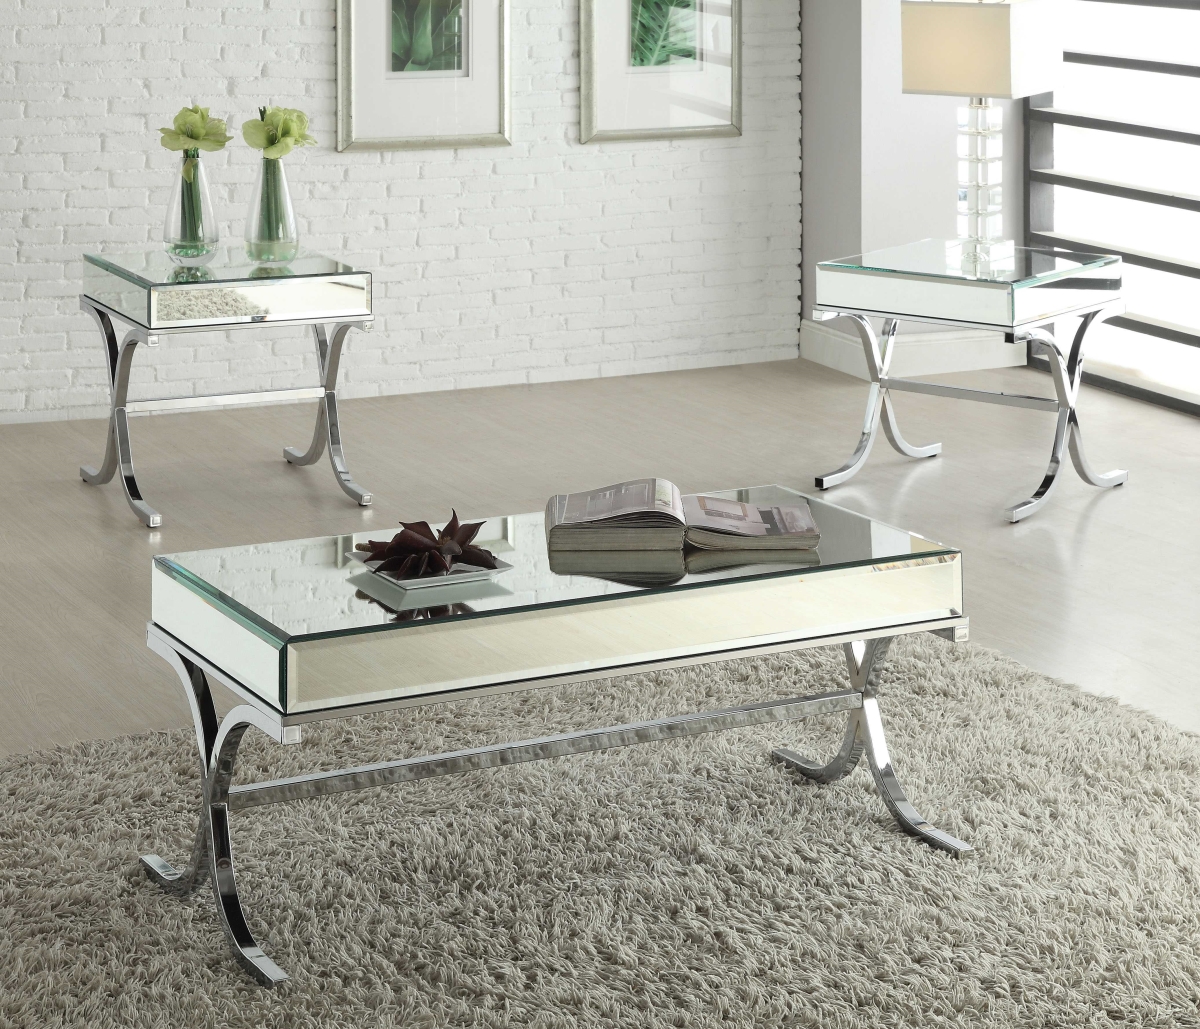 Home Roots Furniture 286042 19 X 42 X 21 In. Mirrored Top & Chrome Tube Coffee Table - Silver